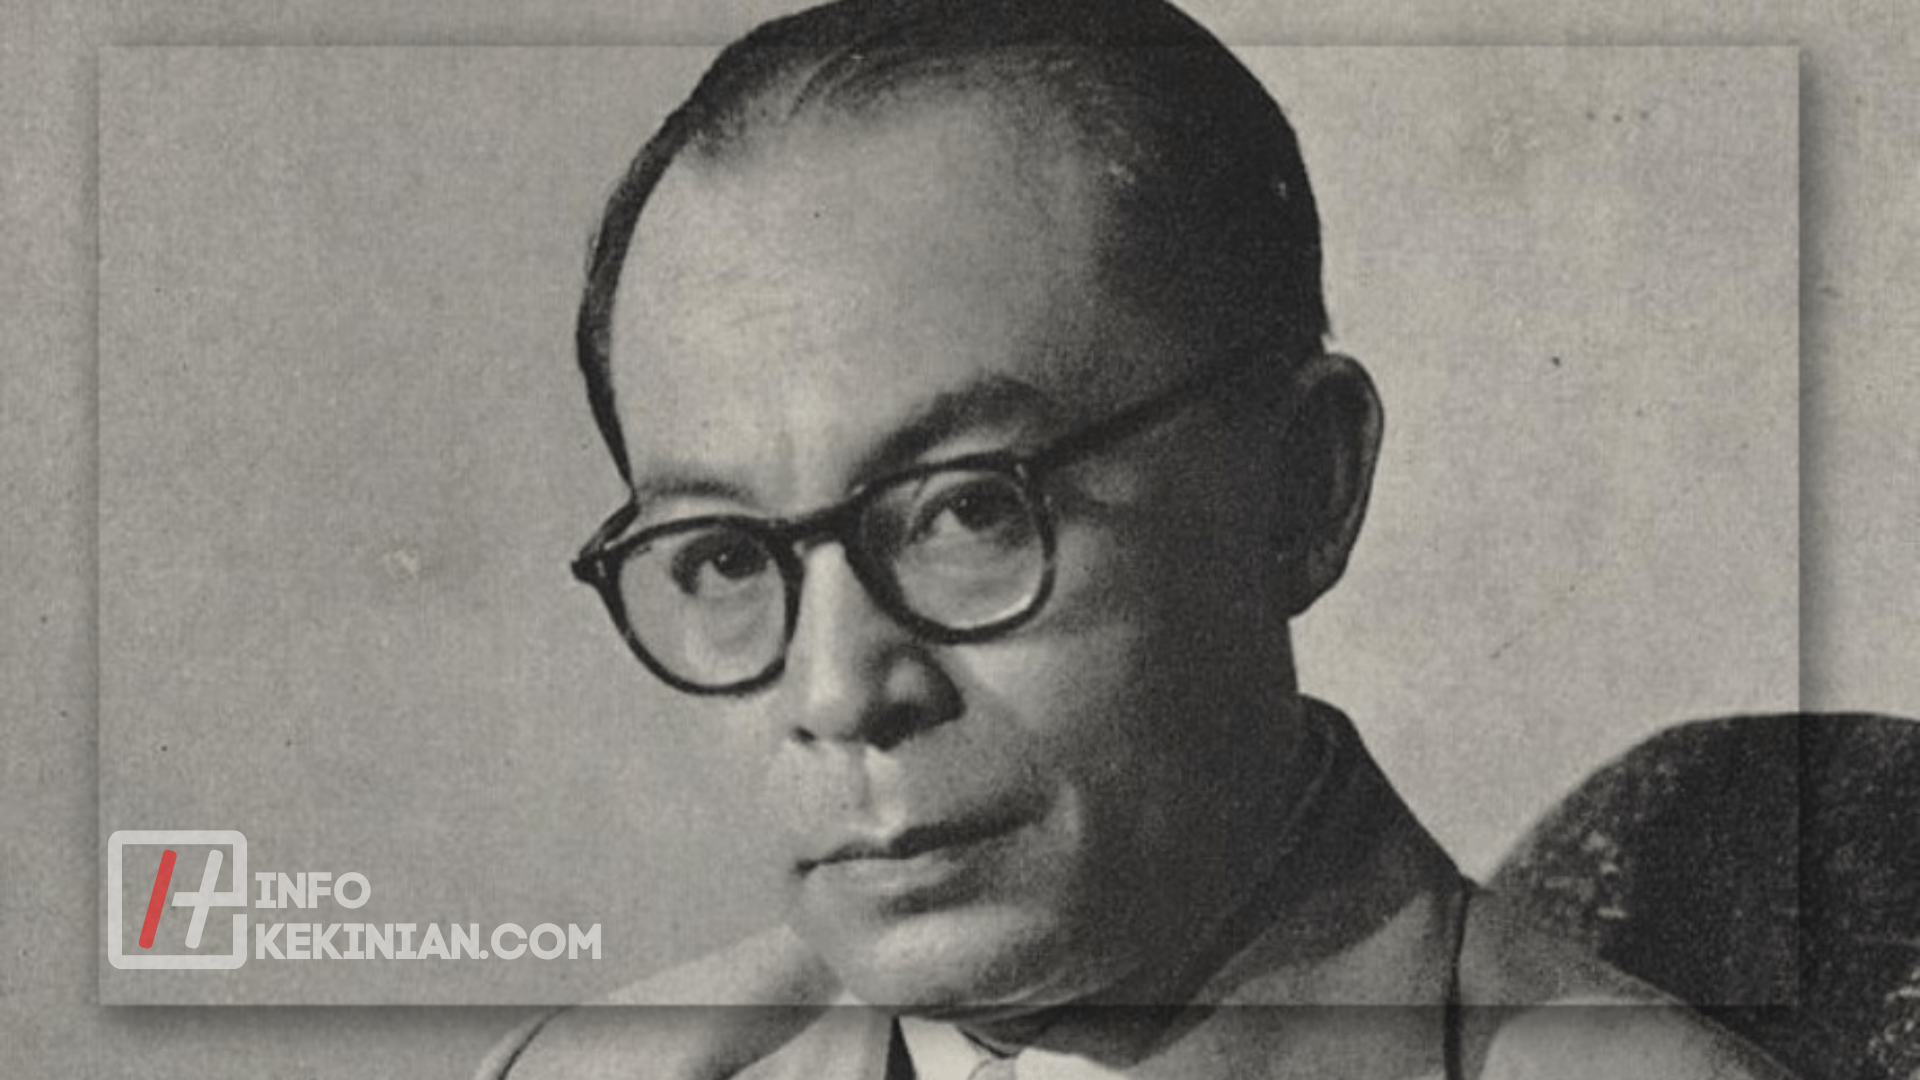 Biography of Mohammad Hatta Concerning Early Life and Education